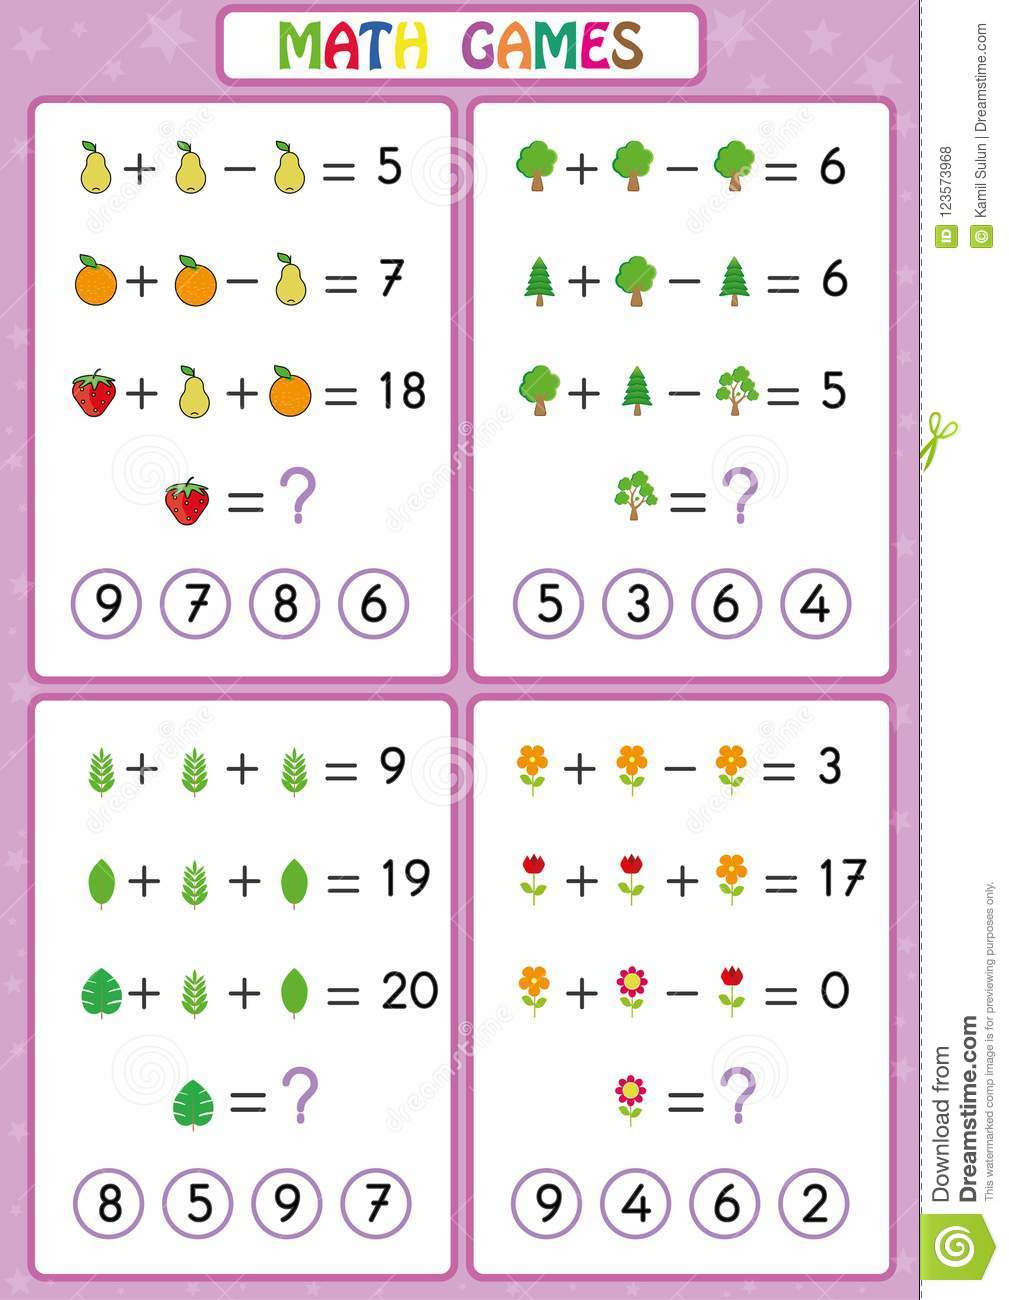 Mathematics Educational Game For Kids Fun Worksheets For